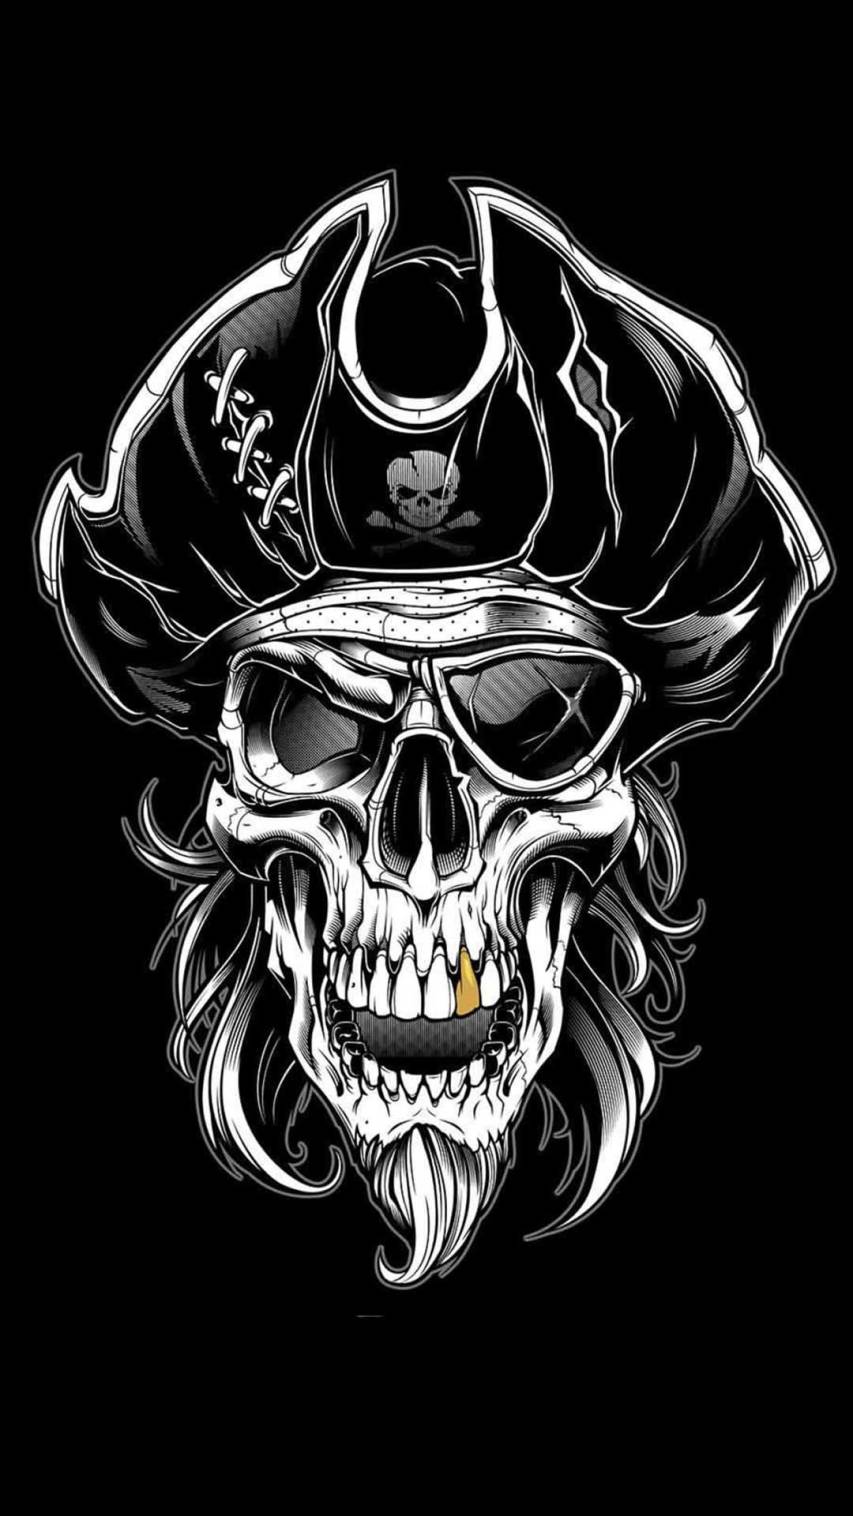 Skull iPhone Wallpapers hd image free download